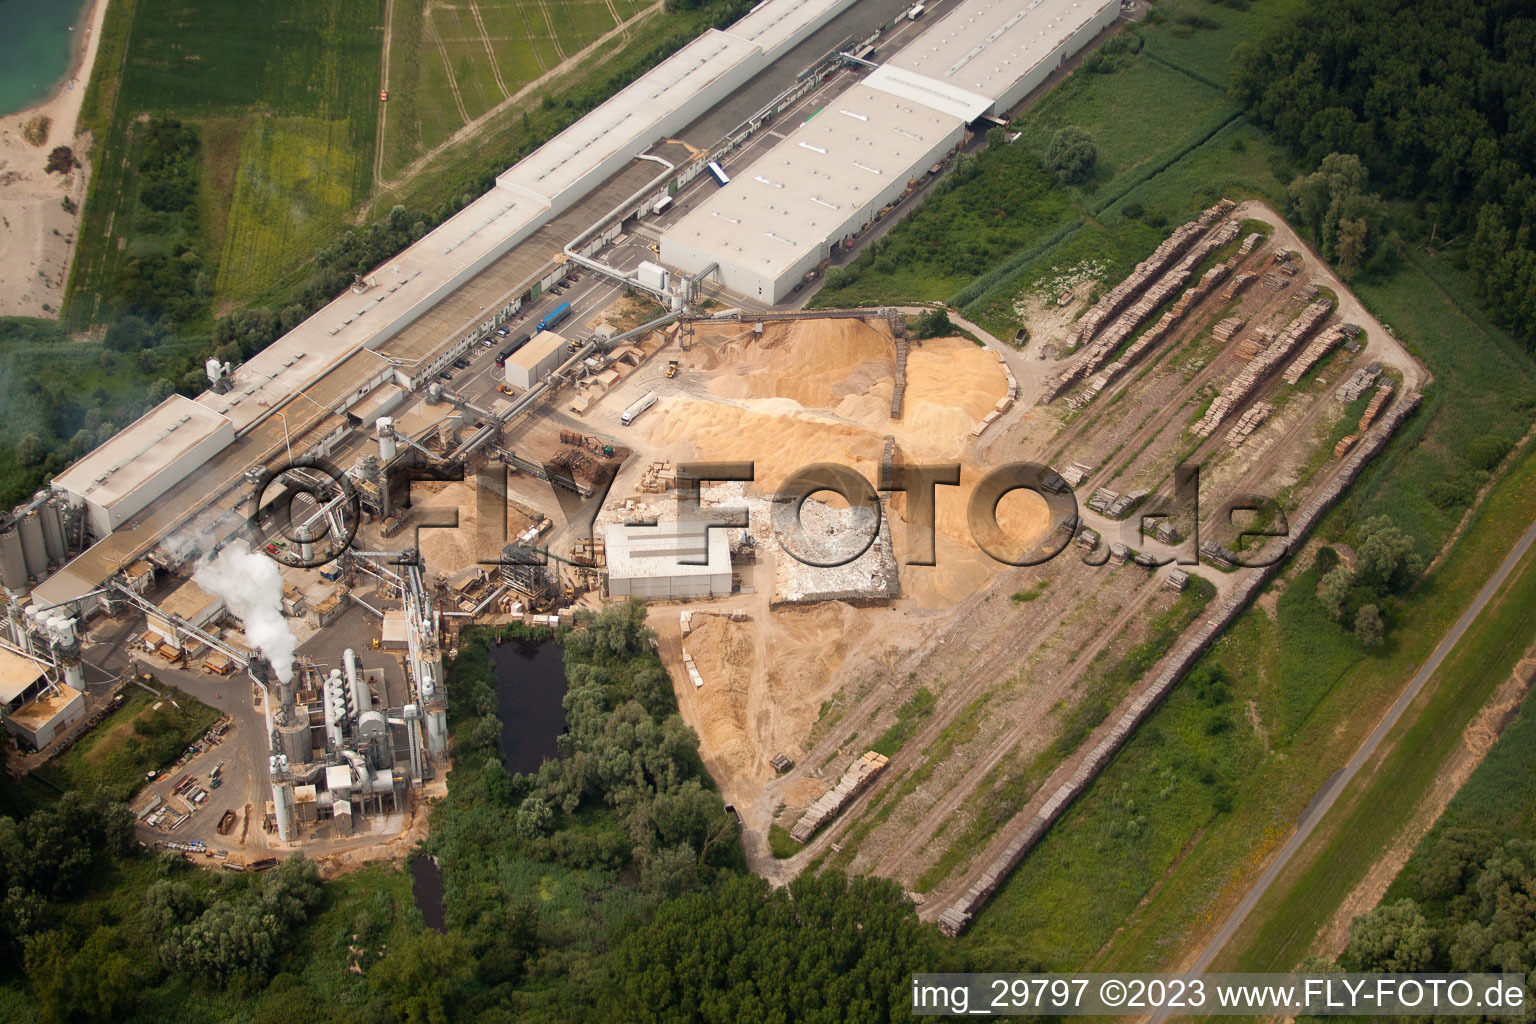 Nolte furniture and woodworks in Germersheim in the state Rhineland-Palatinate, Germany seen from above